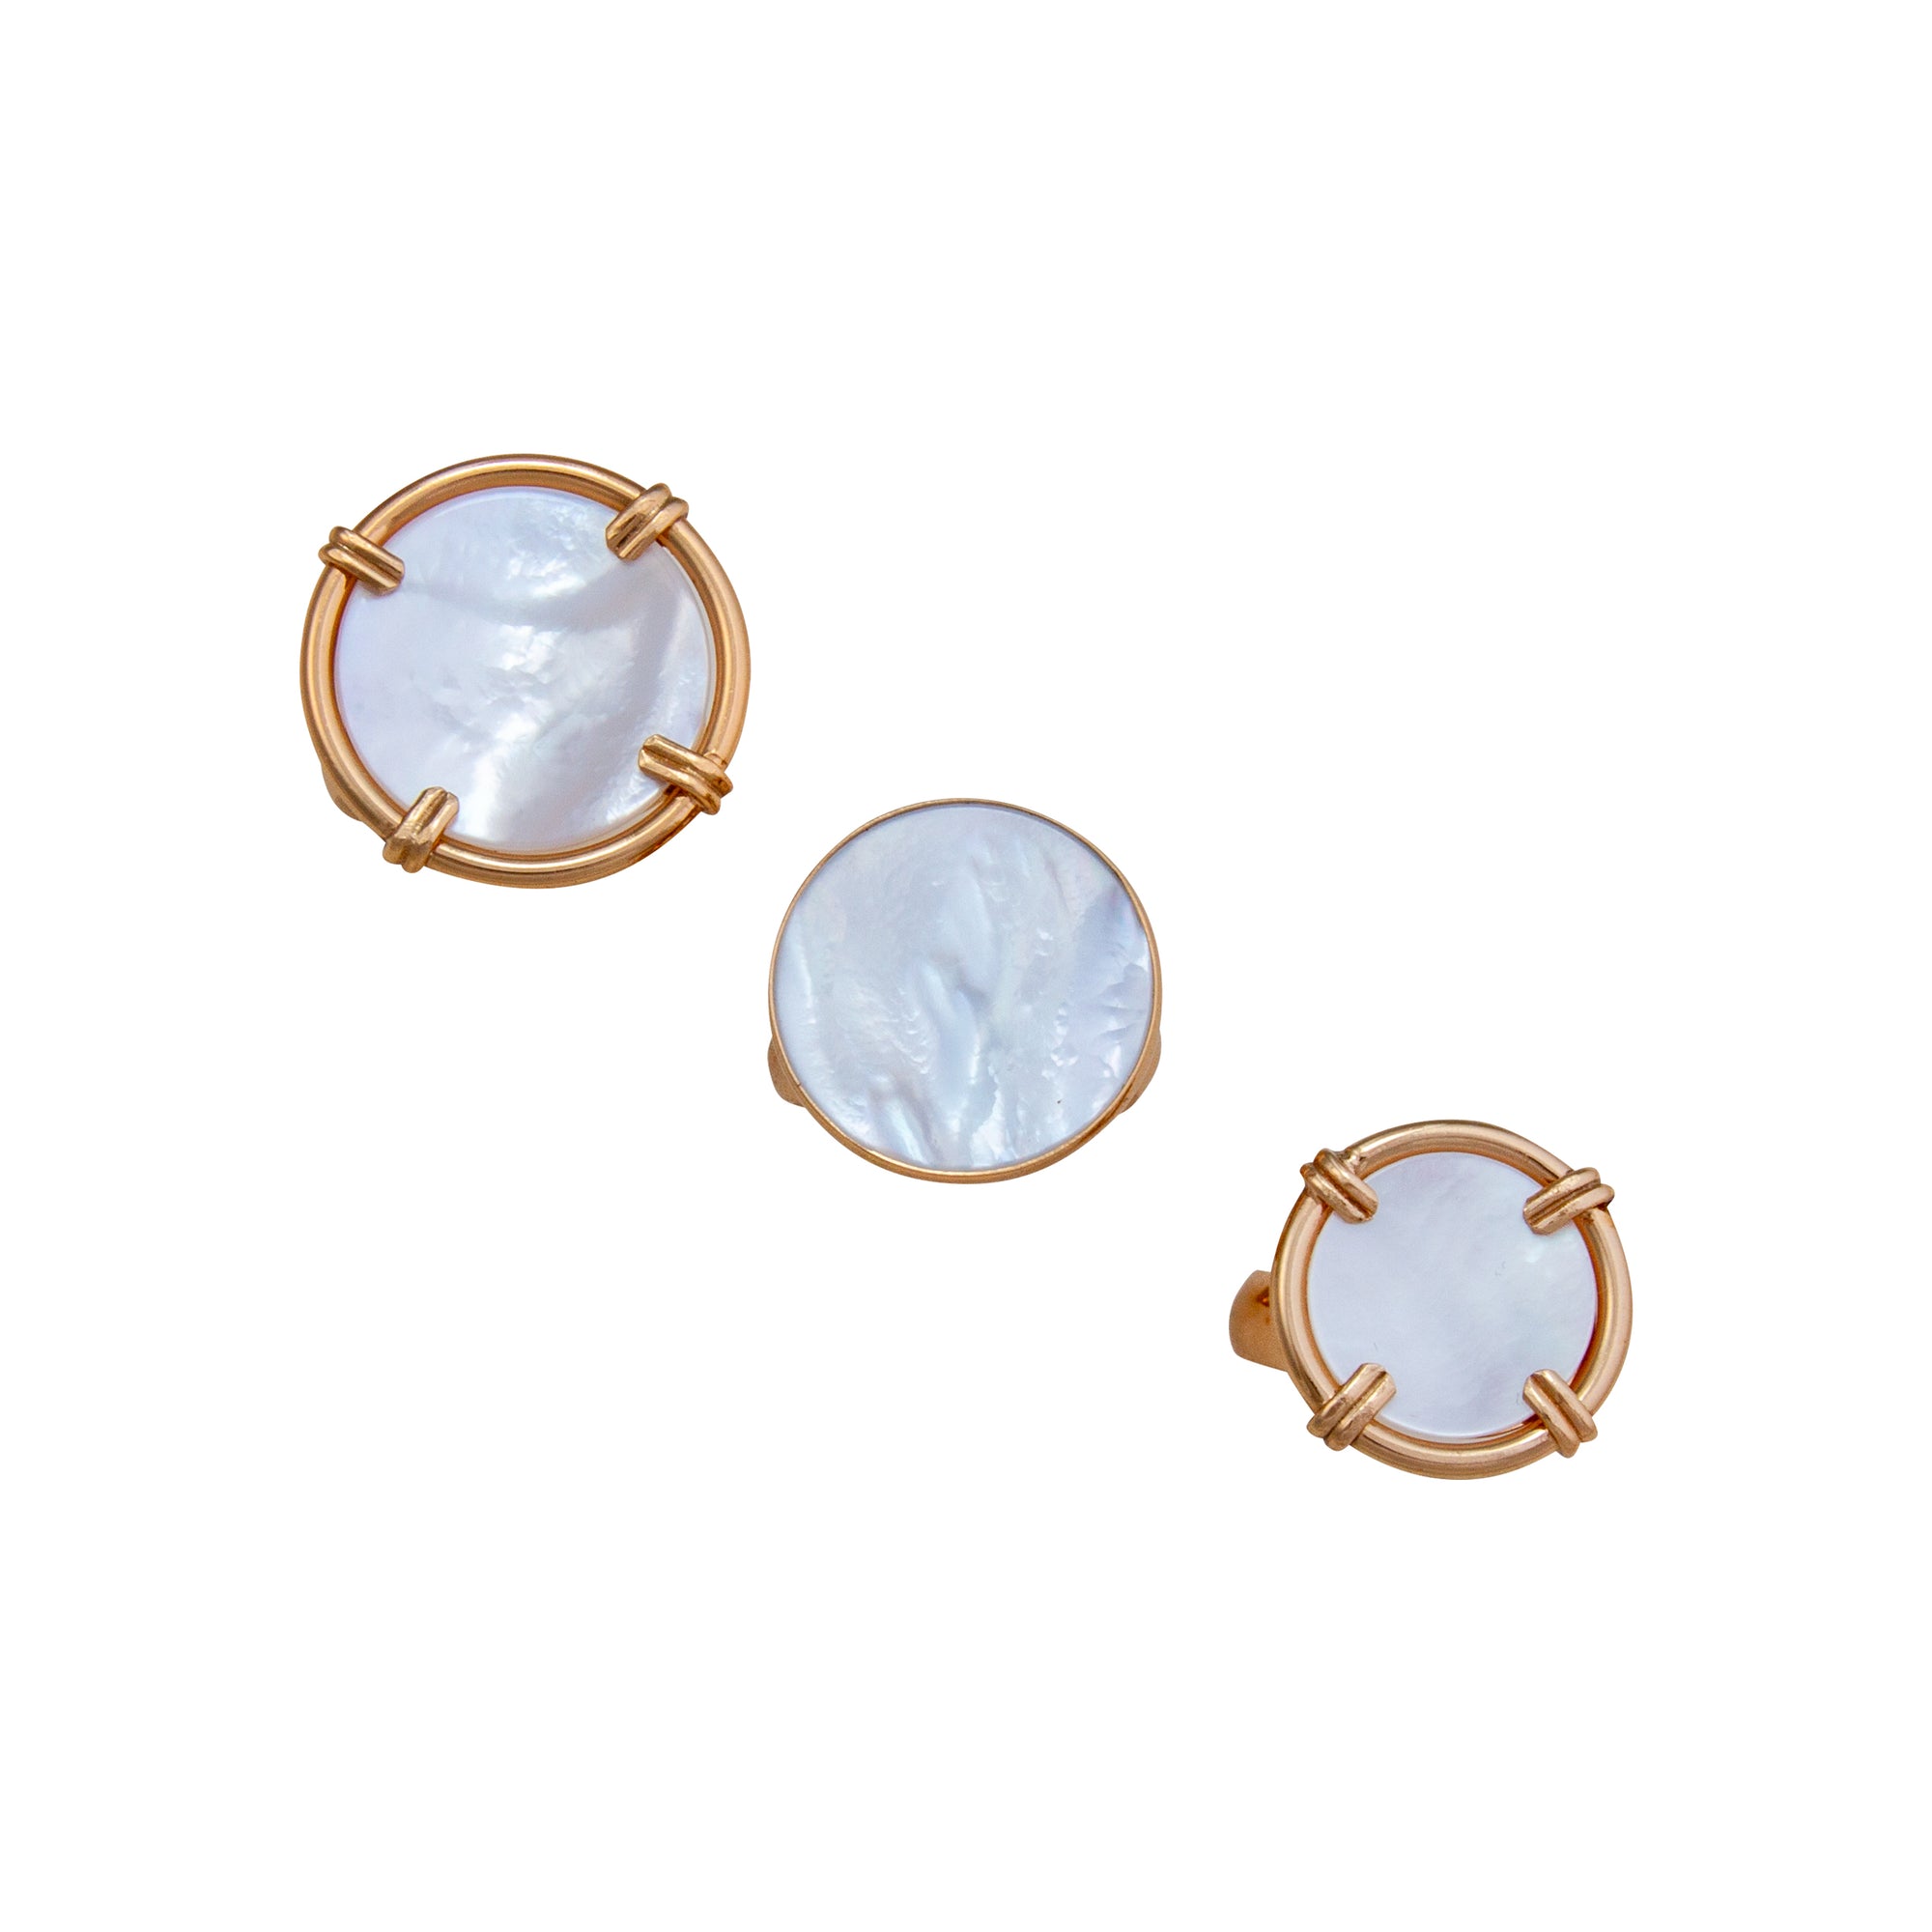 Alchemia Mother of Pearl Prong Set Adjustable Ring | Charles Albert Jewelry